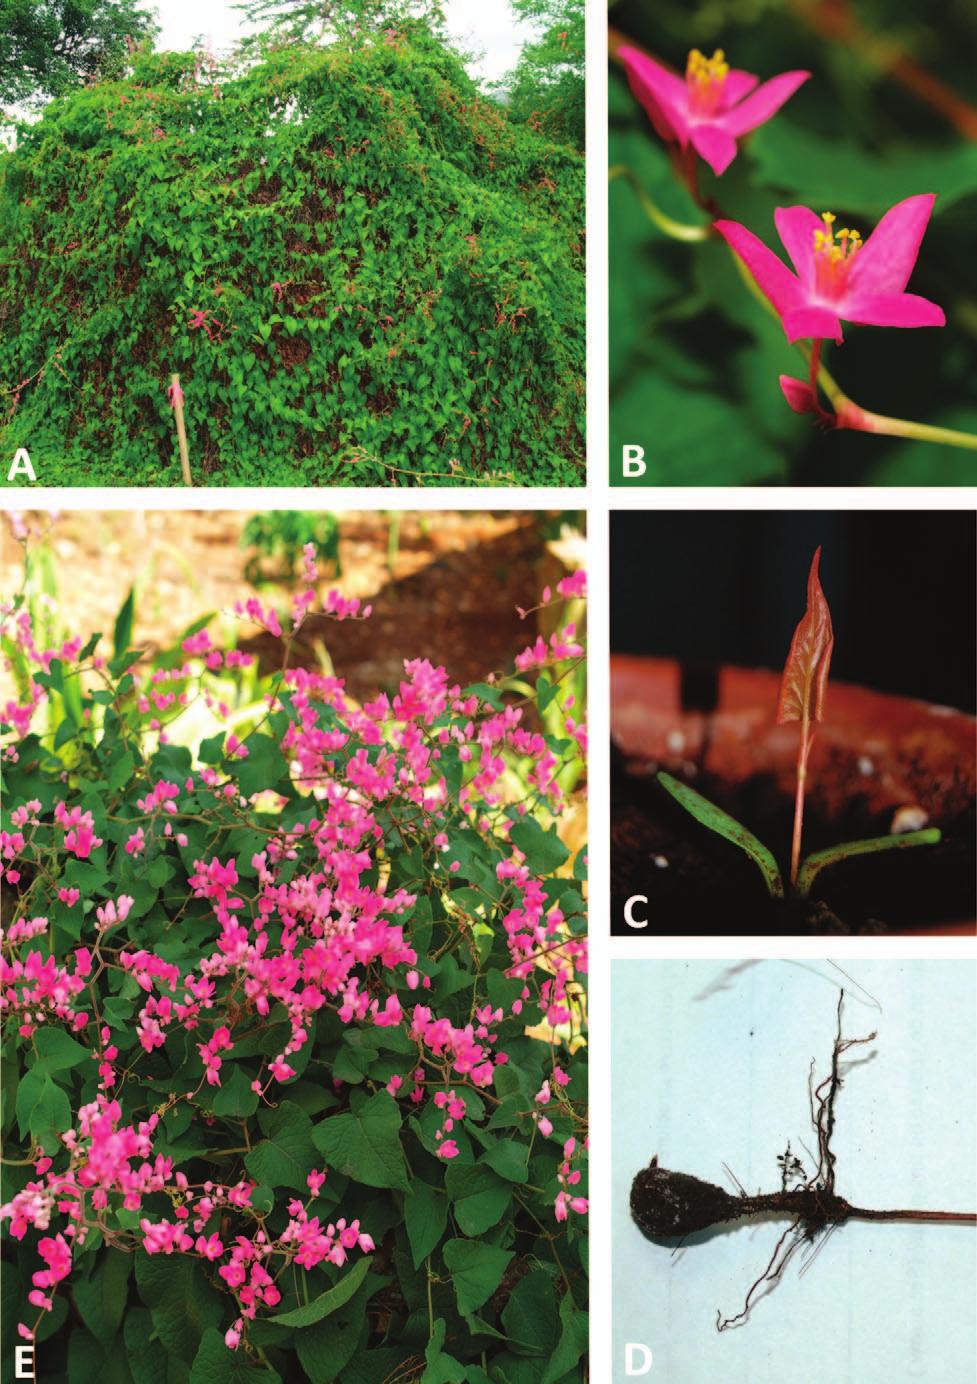 Figure 1. Images clockwise from top left: (A) Habit of Antigonon leptopus on roadside in St. Eustatius. (B) Detail of flower. (C) Seedling with cotyledons and first leaf.